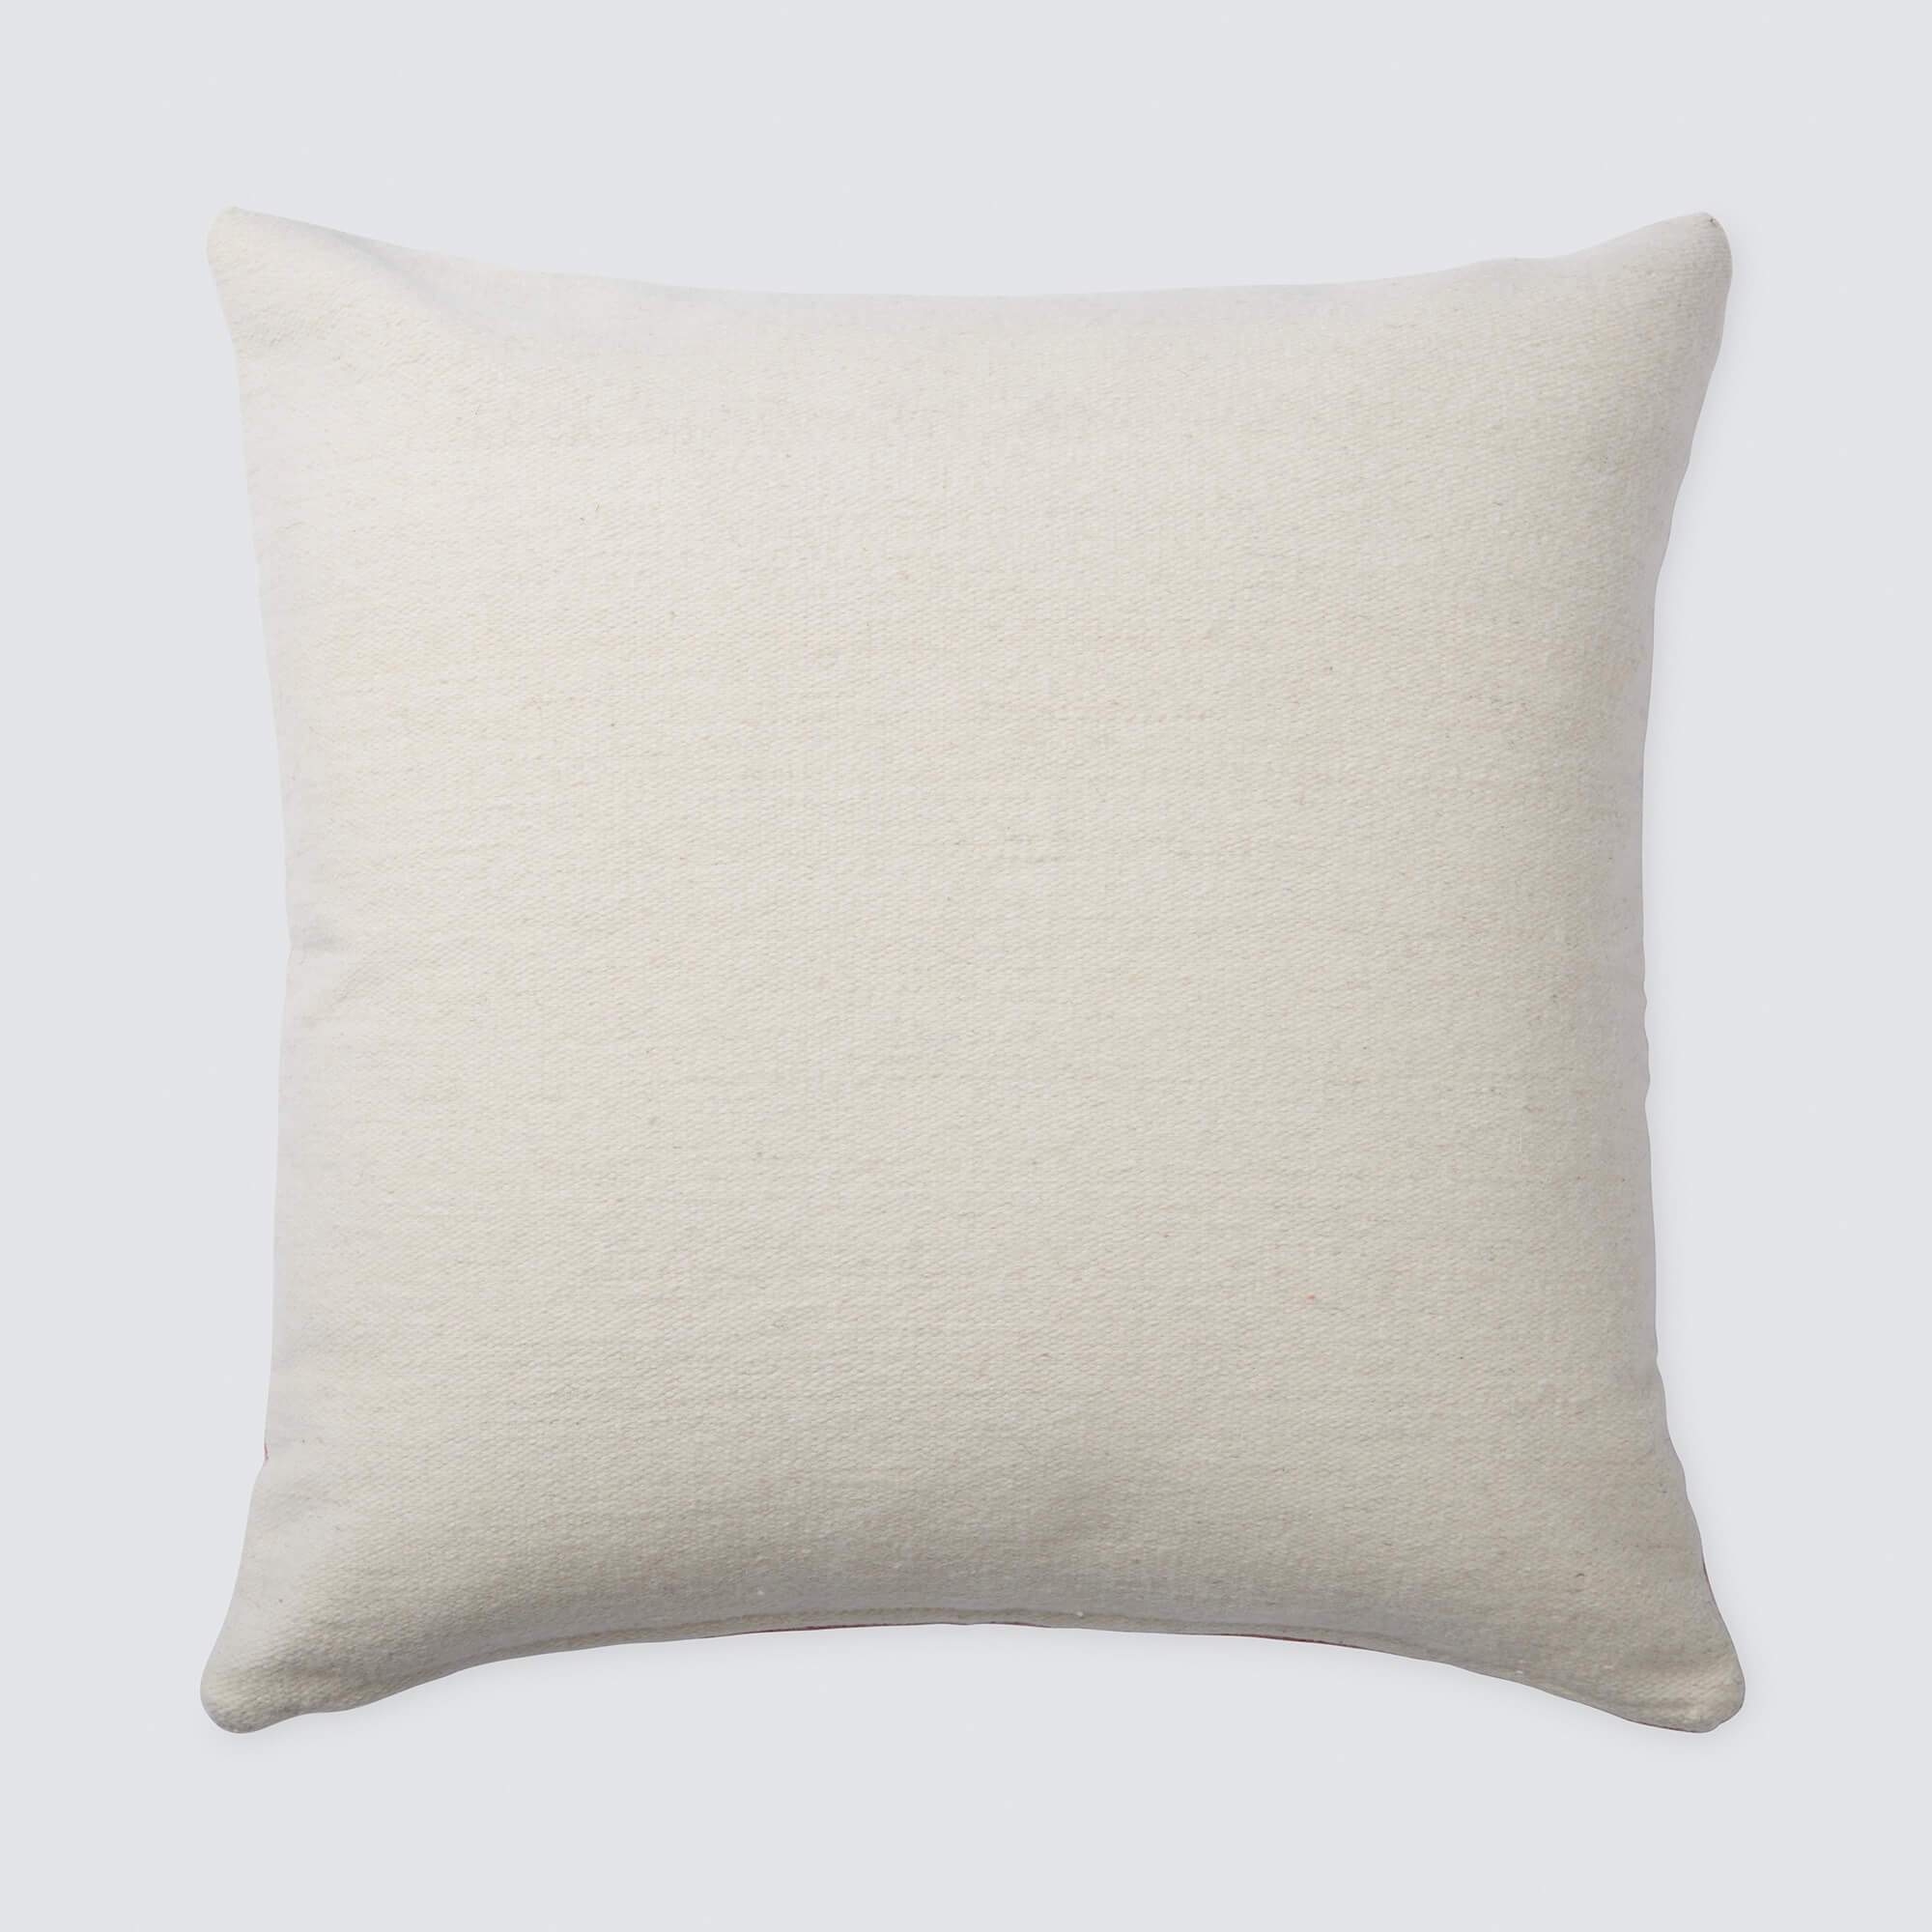 The Citizenry Marea Pillow | 18" x 18" | Made You Blush - Image 8